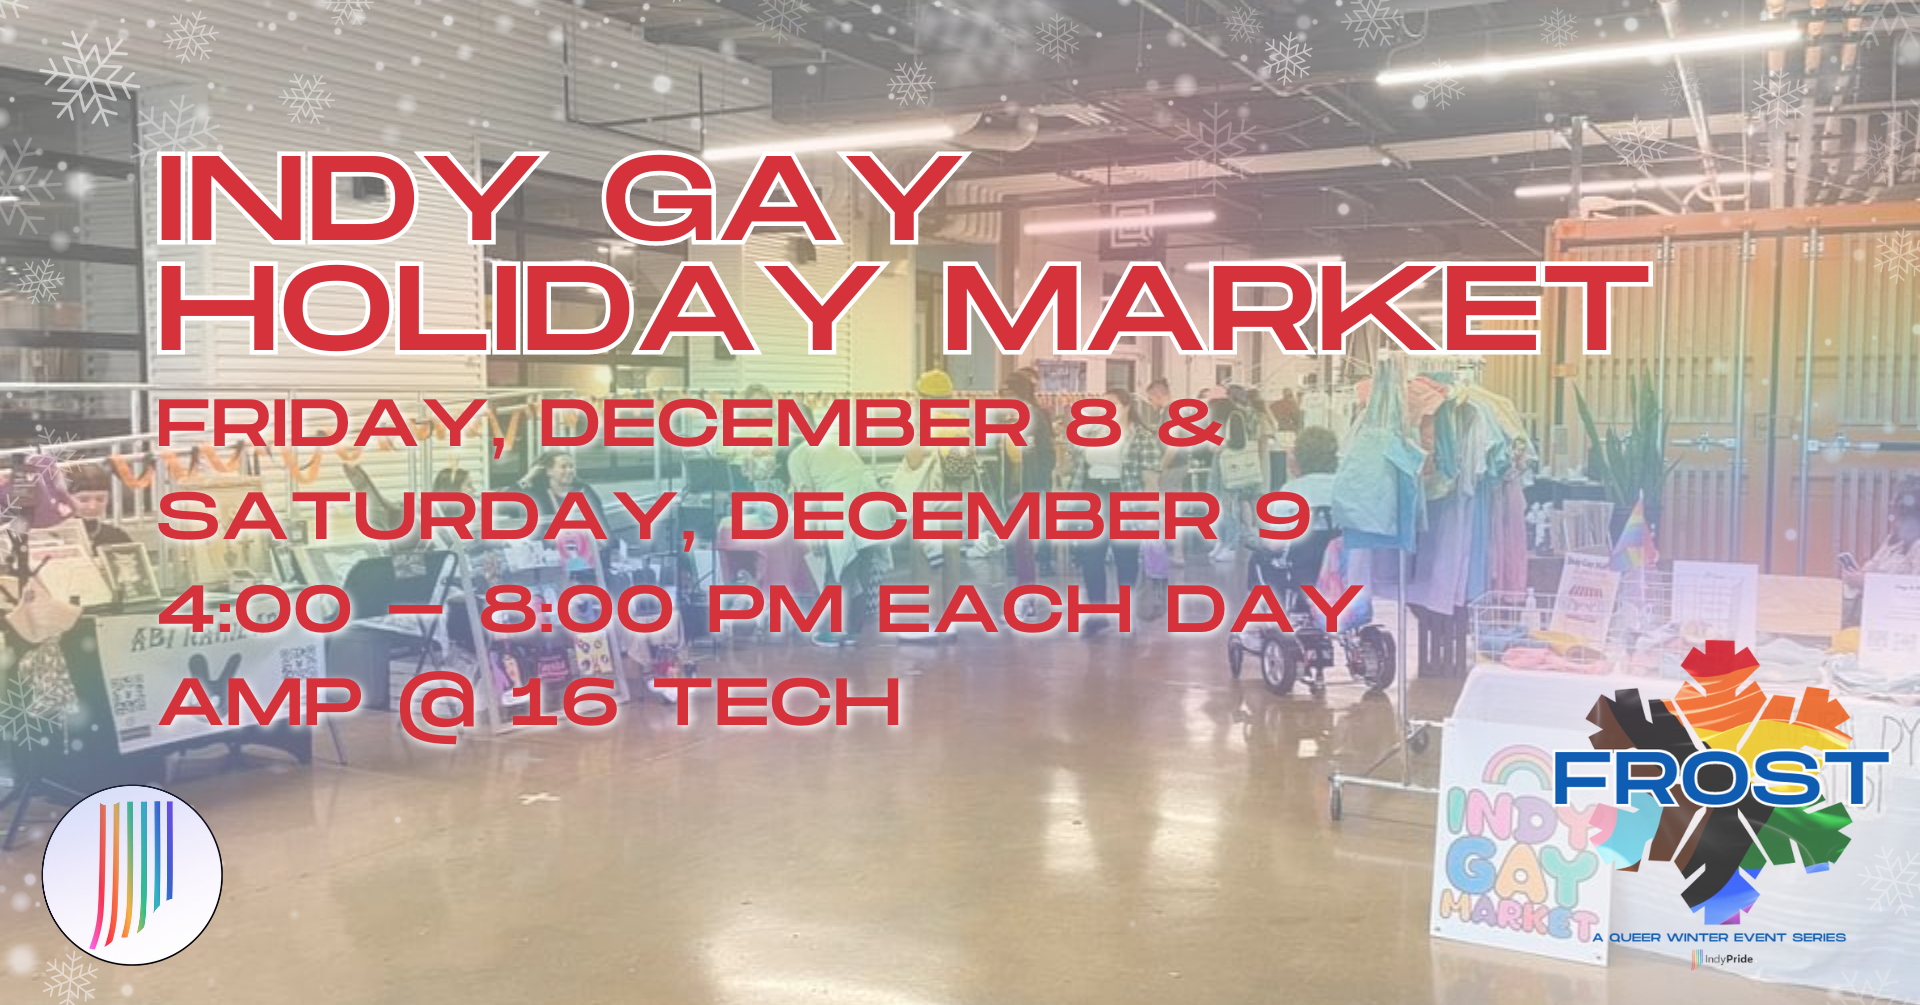 Indy Gay Holiday Market – a part of the FROST event series